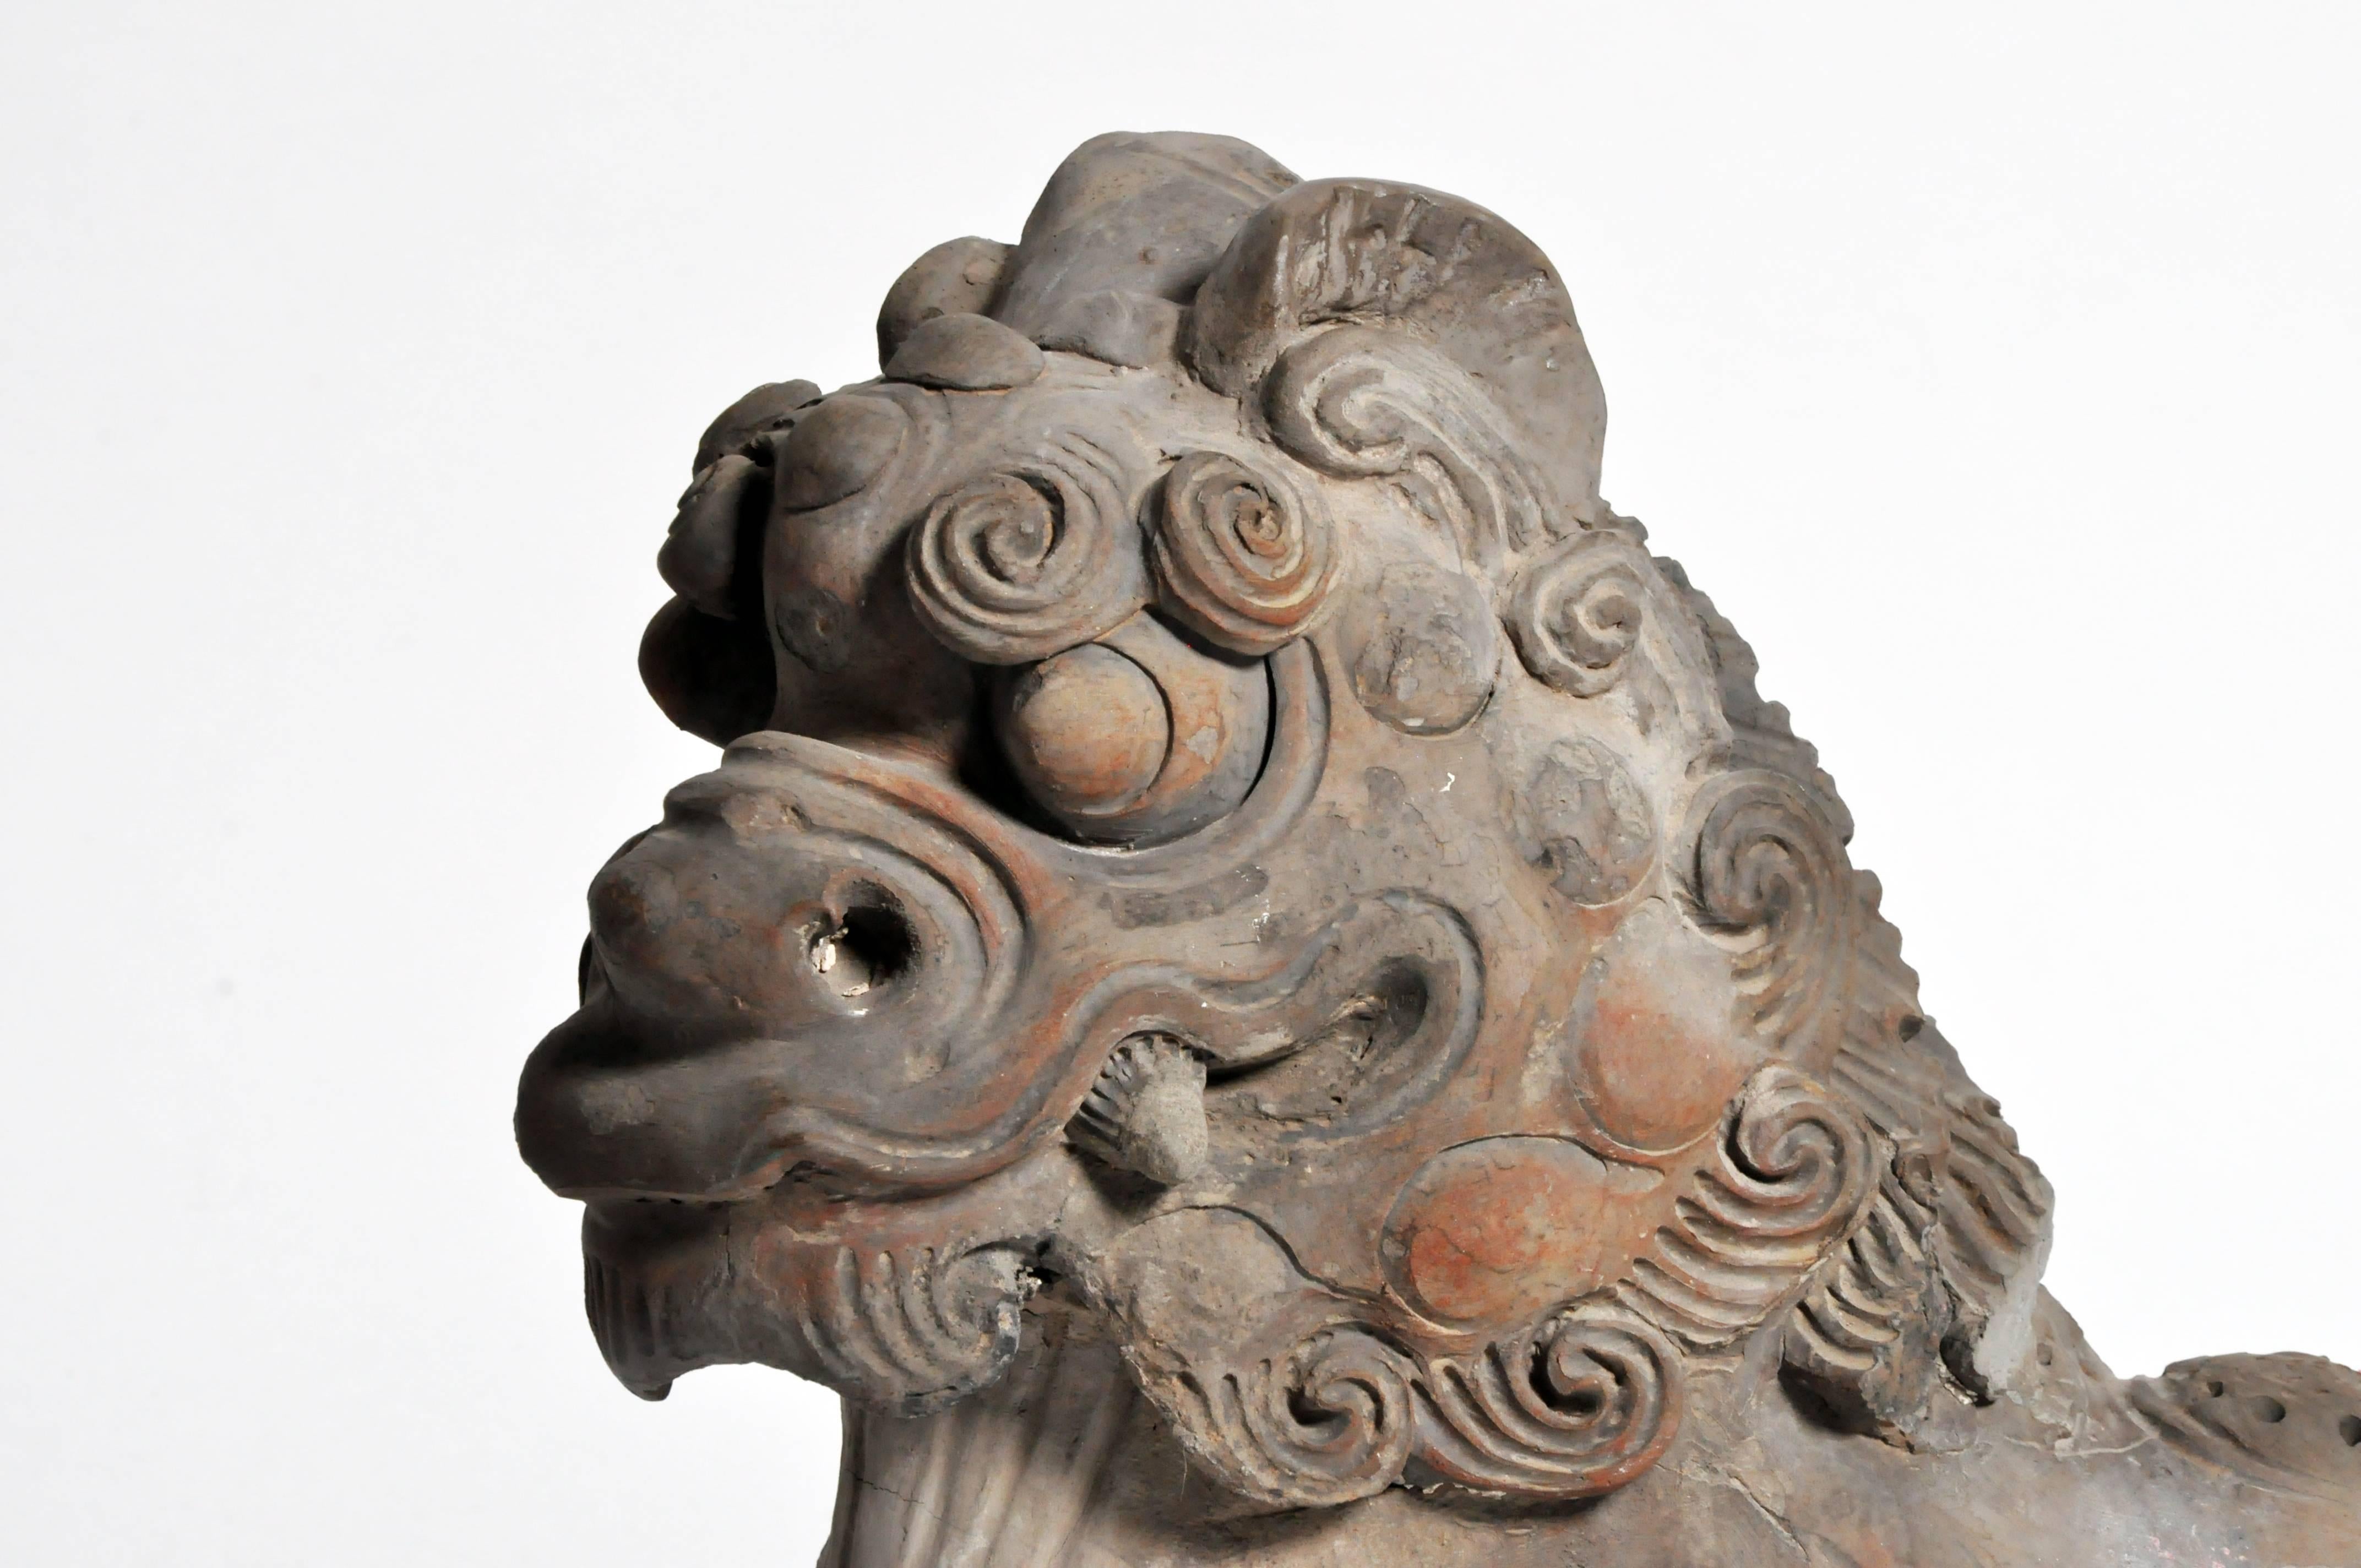 Northern Chinese roofs were made from grey terracotta tiles. The peak of the roof was often decorated with tiles featuring mythological creatures and other protective talismans. This foo dog was placed at the end of a row of decorative figures. The